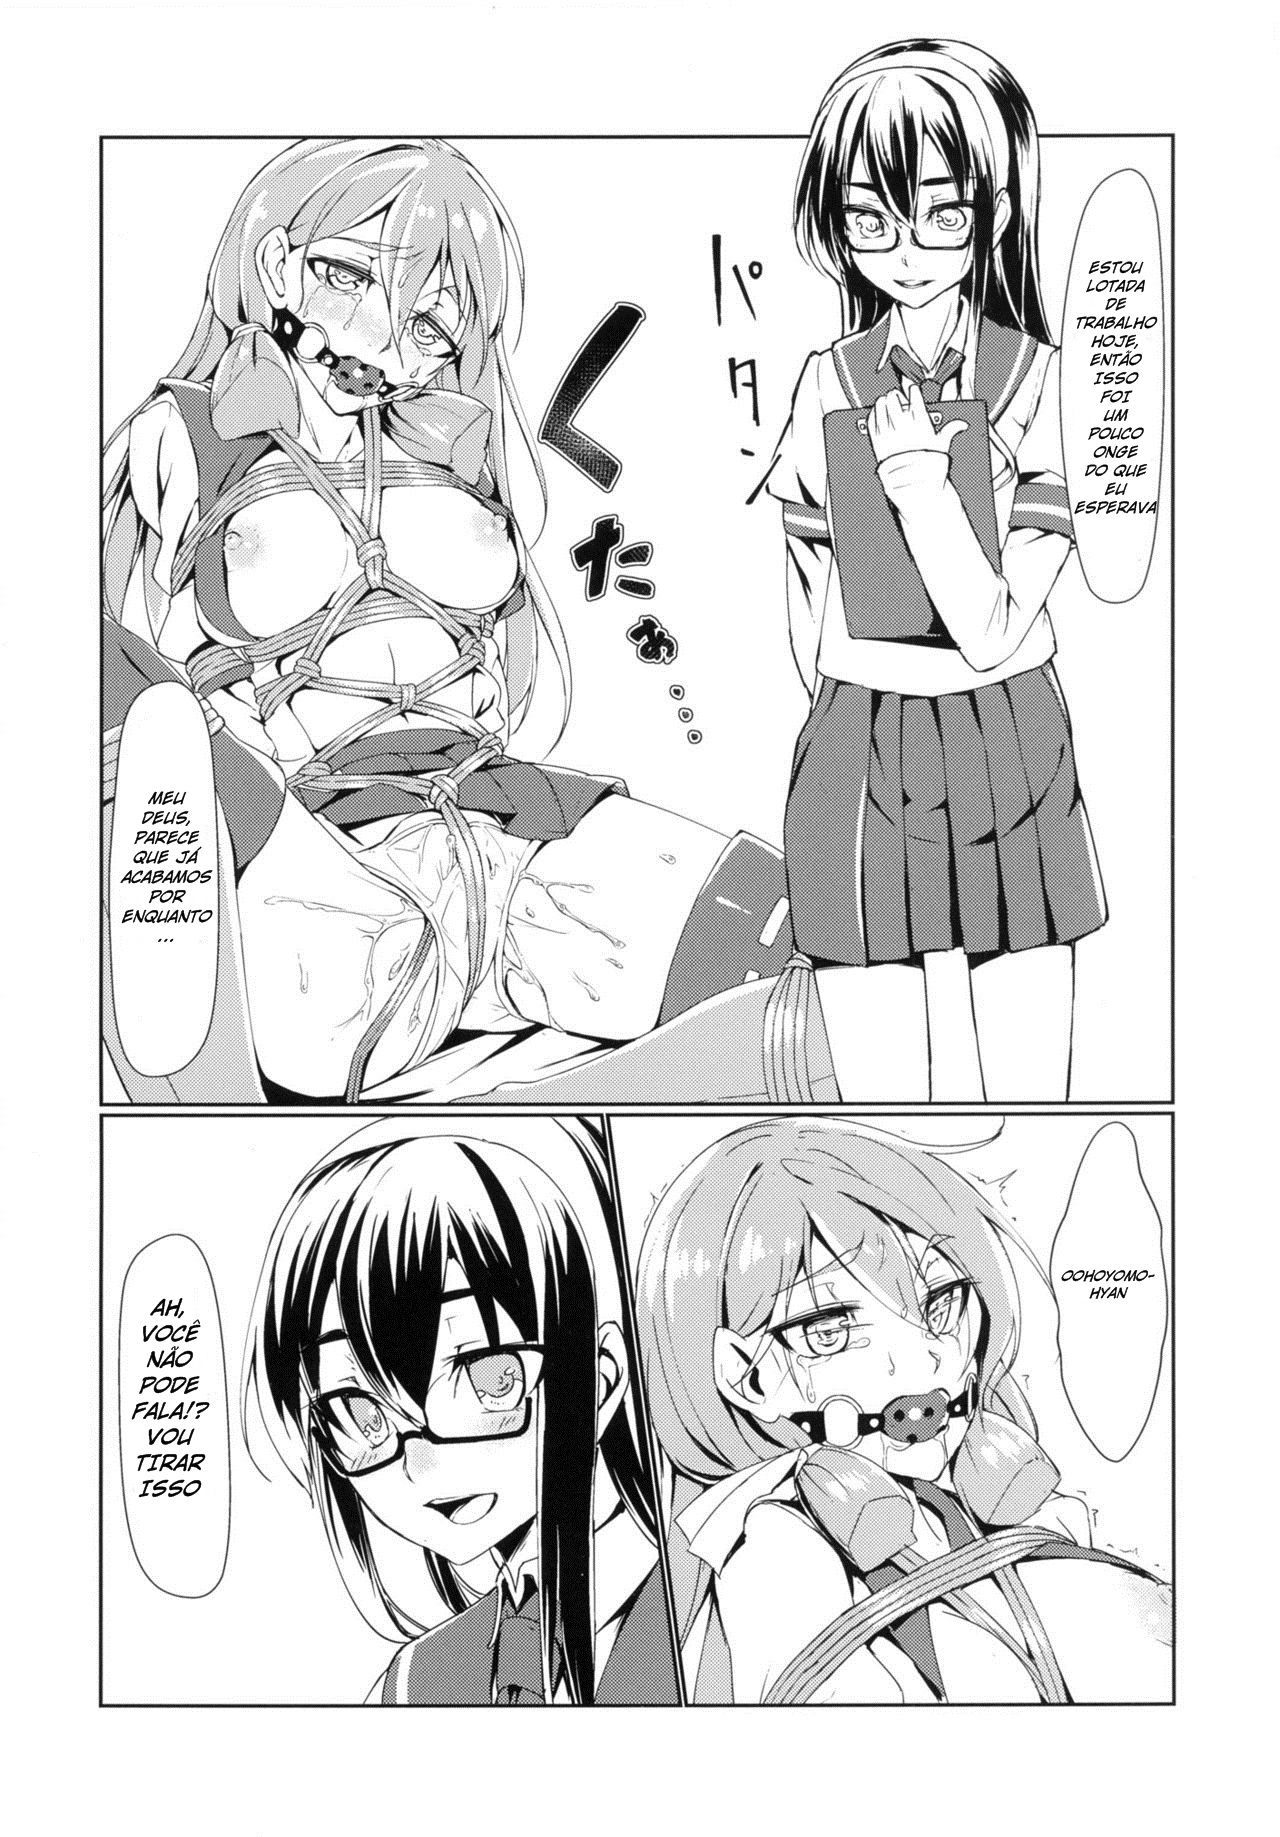 [face to face (ryoattoryo)] Ooyodo to Daily Ninmu Akashi Choukyou Hen | Daily Mission with Ooyodo: Training Akashi (Kantai Collection -KanColle-) [Portuguese-BR] [Hentai Season] [Digital] [face to face (りょう＠涼)] 大淀とデイリー任務 明石調教編 (艦隊これくしょん -艦これ-) [ポルトガル翻訳] [DL版]